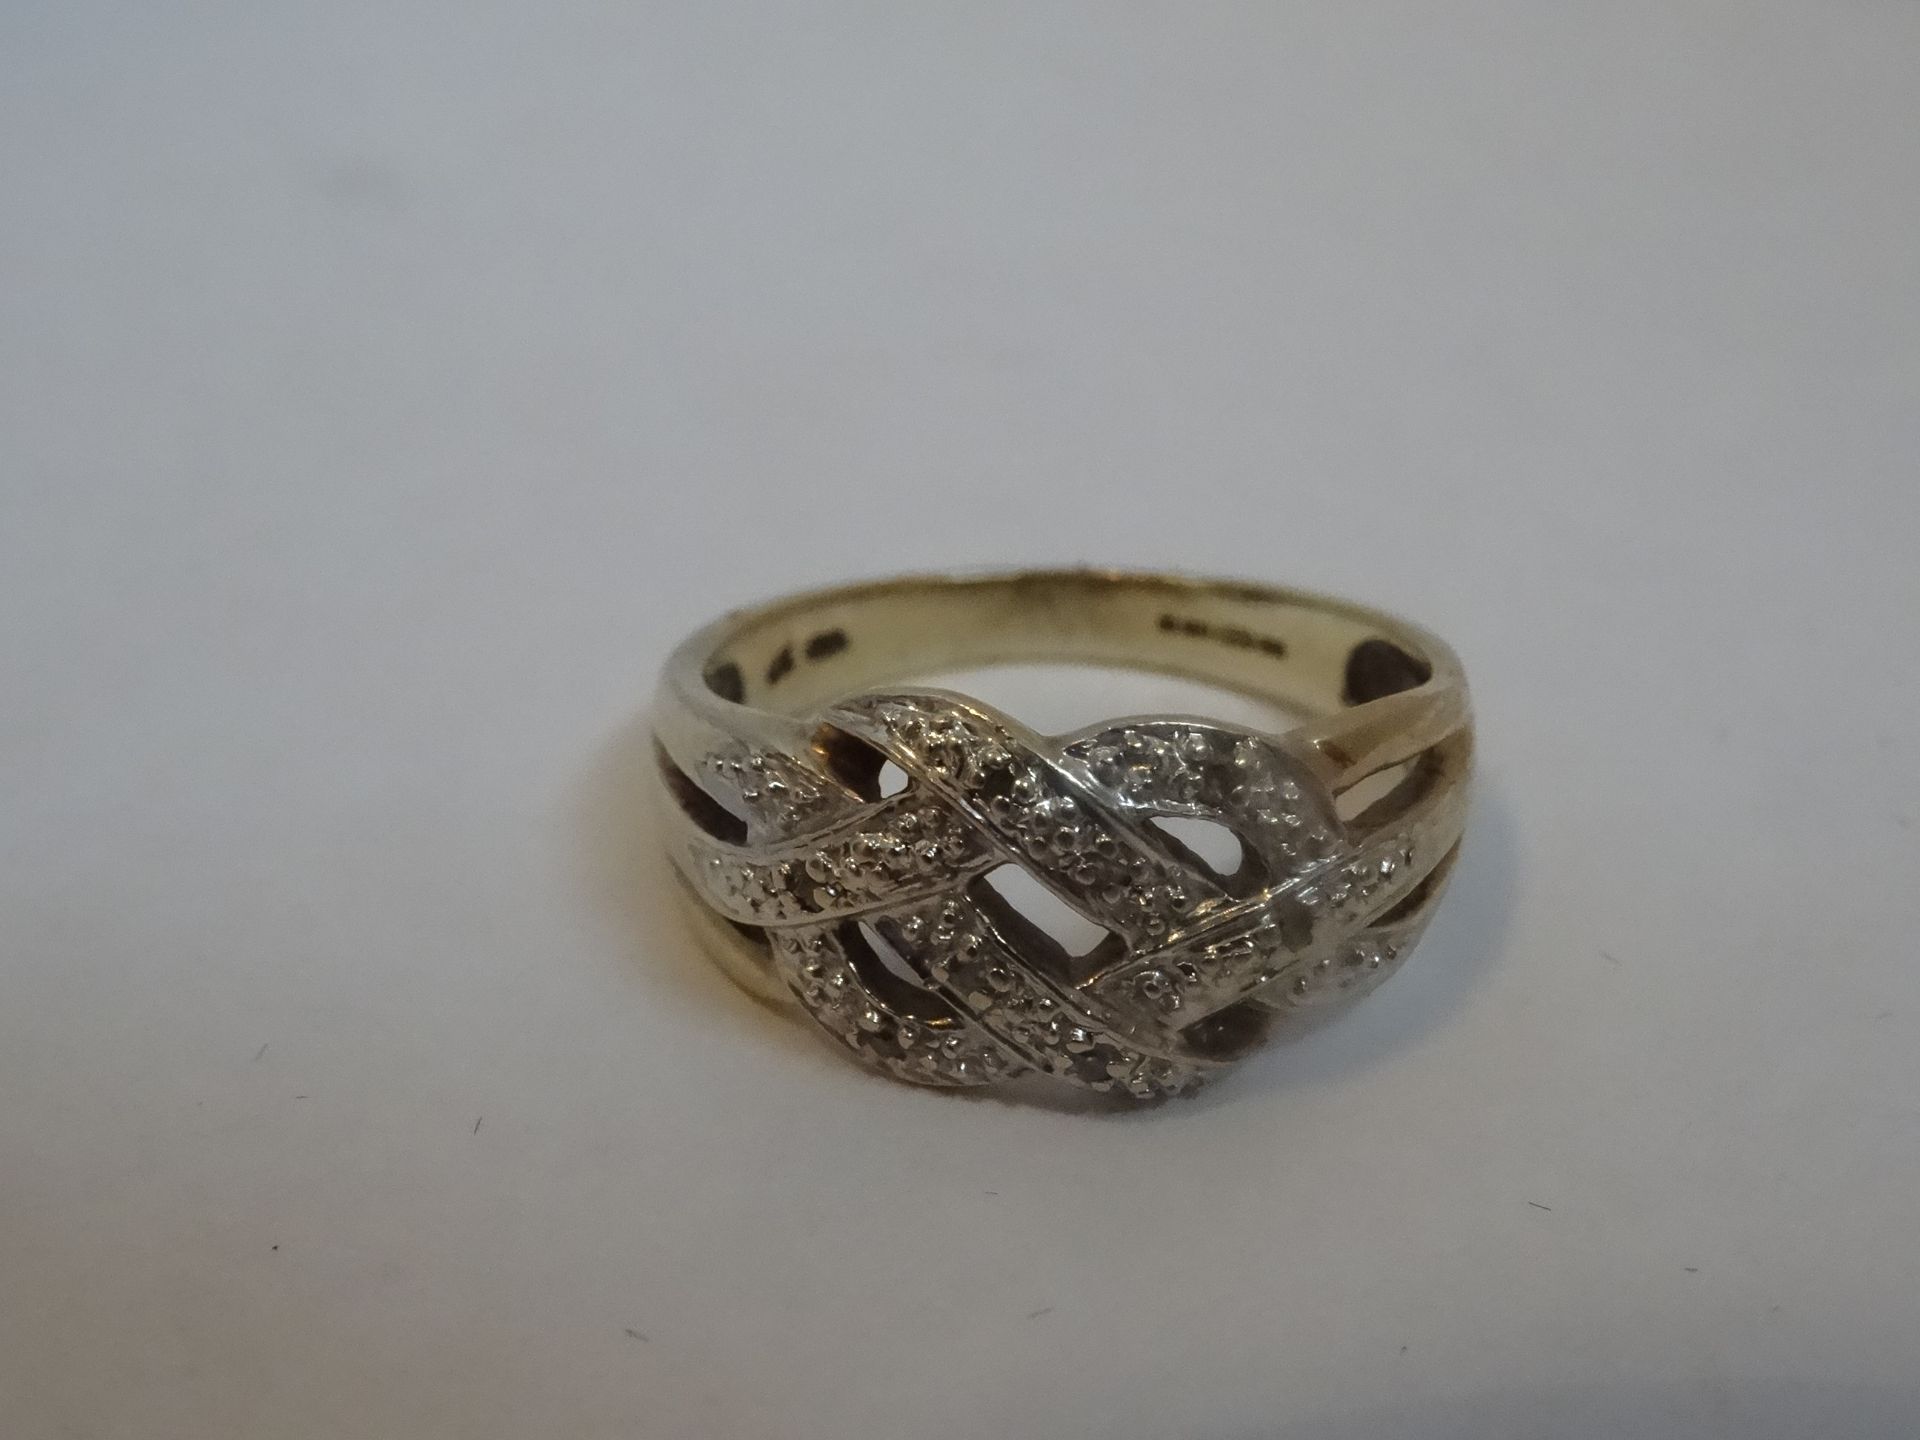 9 Carat Yellow Gold Diamond Pave Ring. Total Piece Weight 3.01 Grams - Image 3 of 3